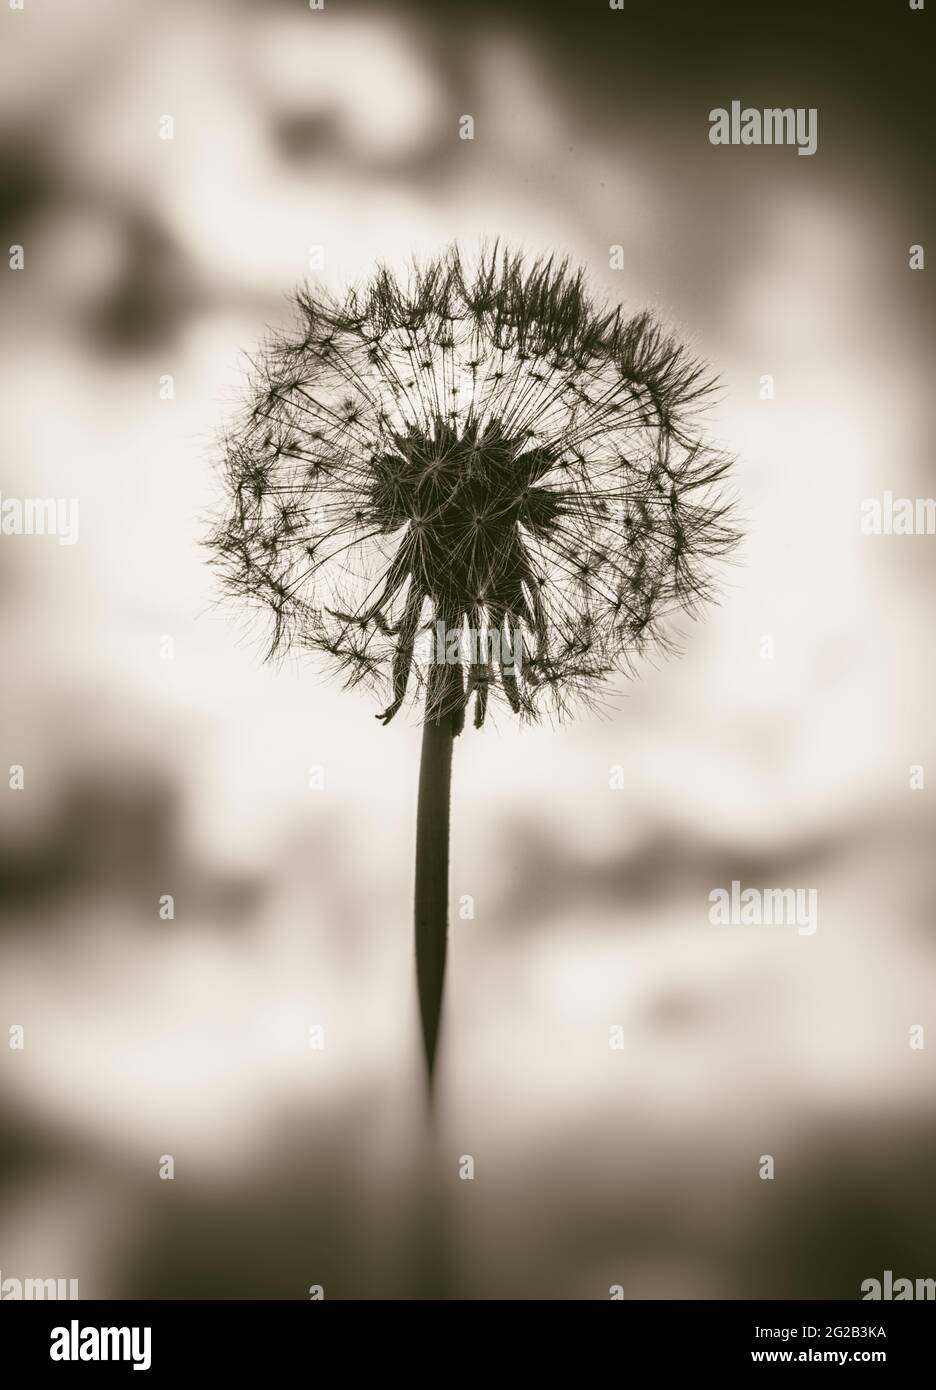 Silhouette of dandelion flower or blowball head covered with seeds. Black and white picture. Stock Photo